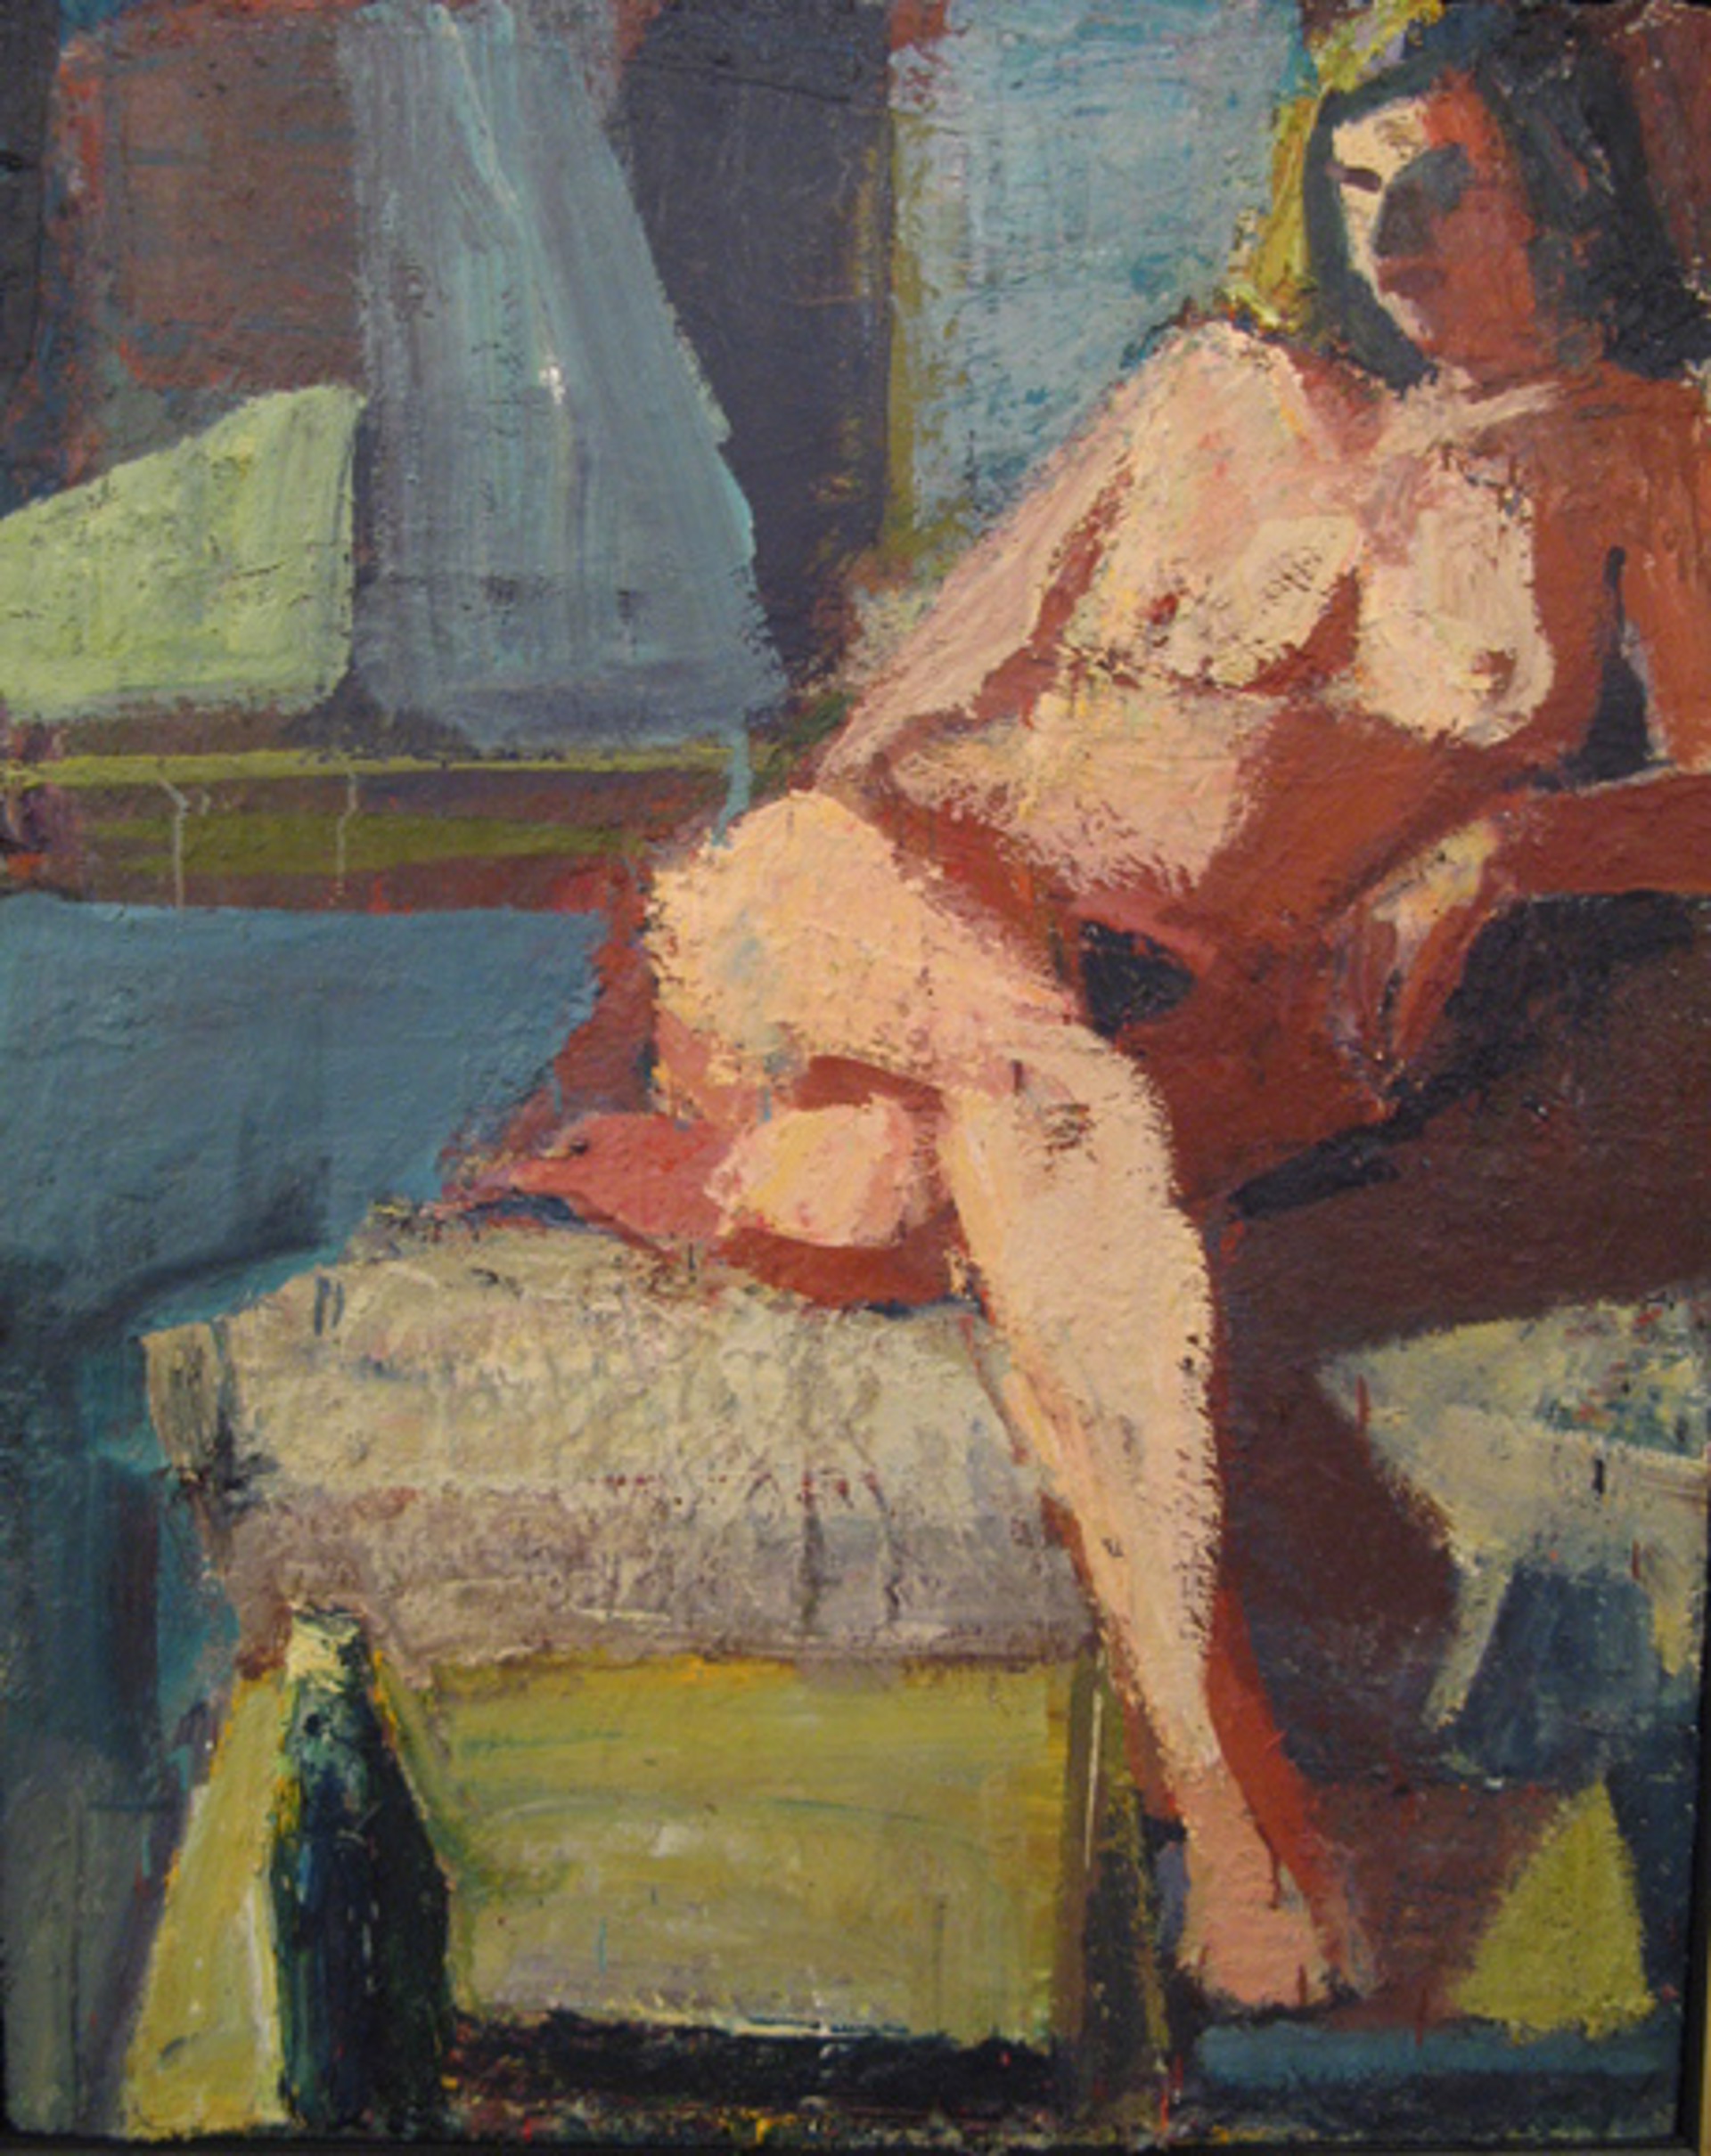 Nude Summer by Terry St. John